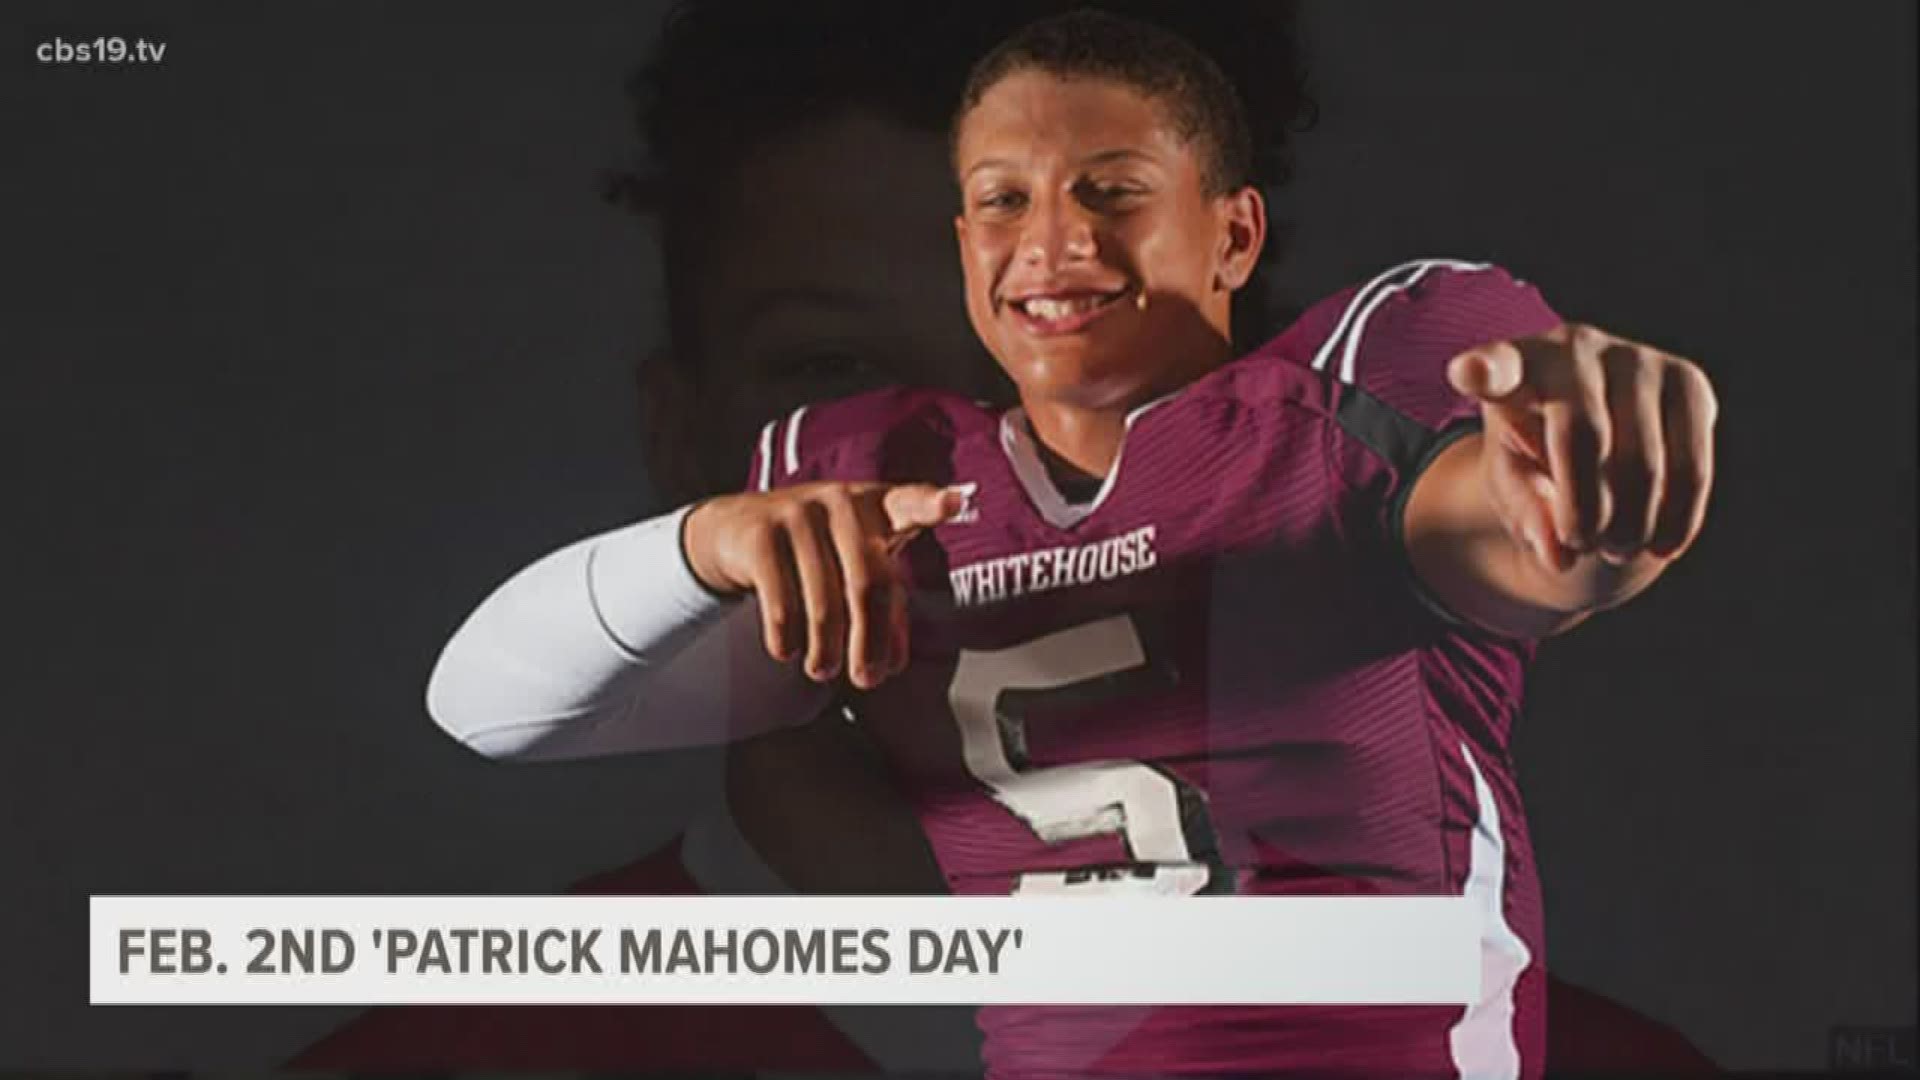 Patrick Mahomes' greatest inheritance was received with ulterior